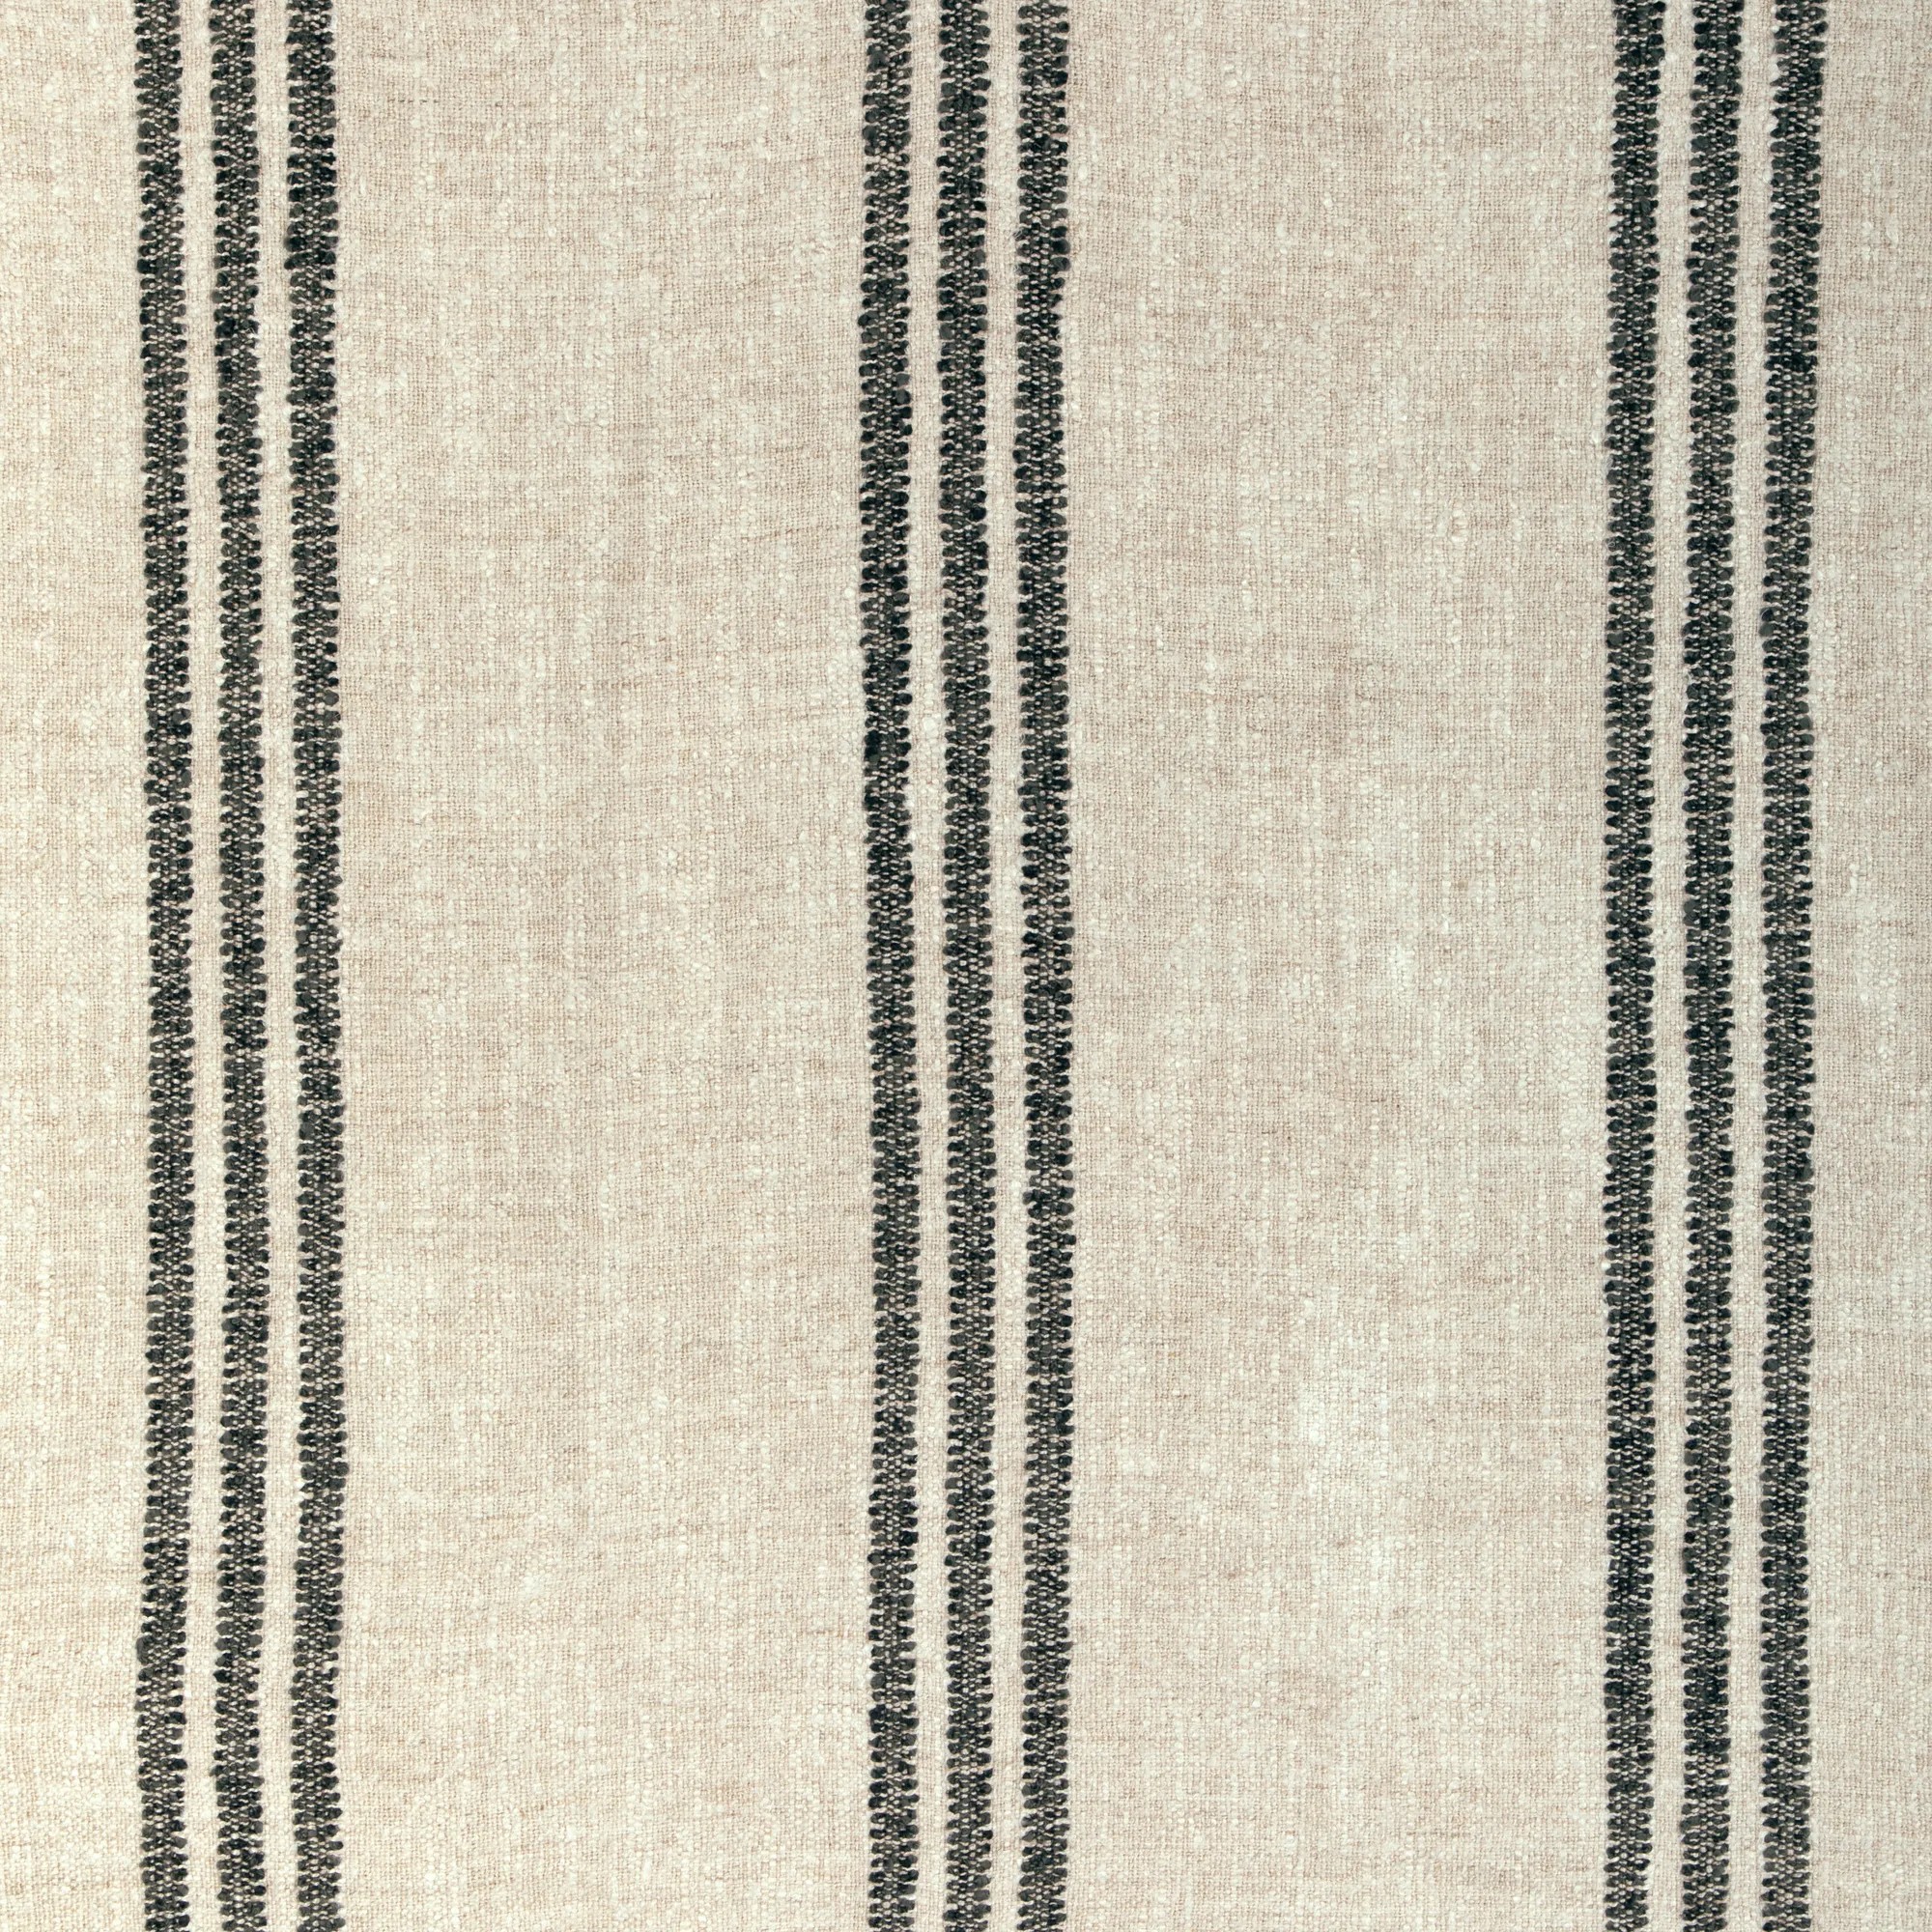 a white and black striped rug with black stripes